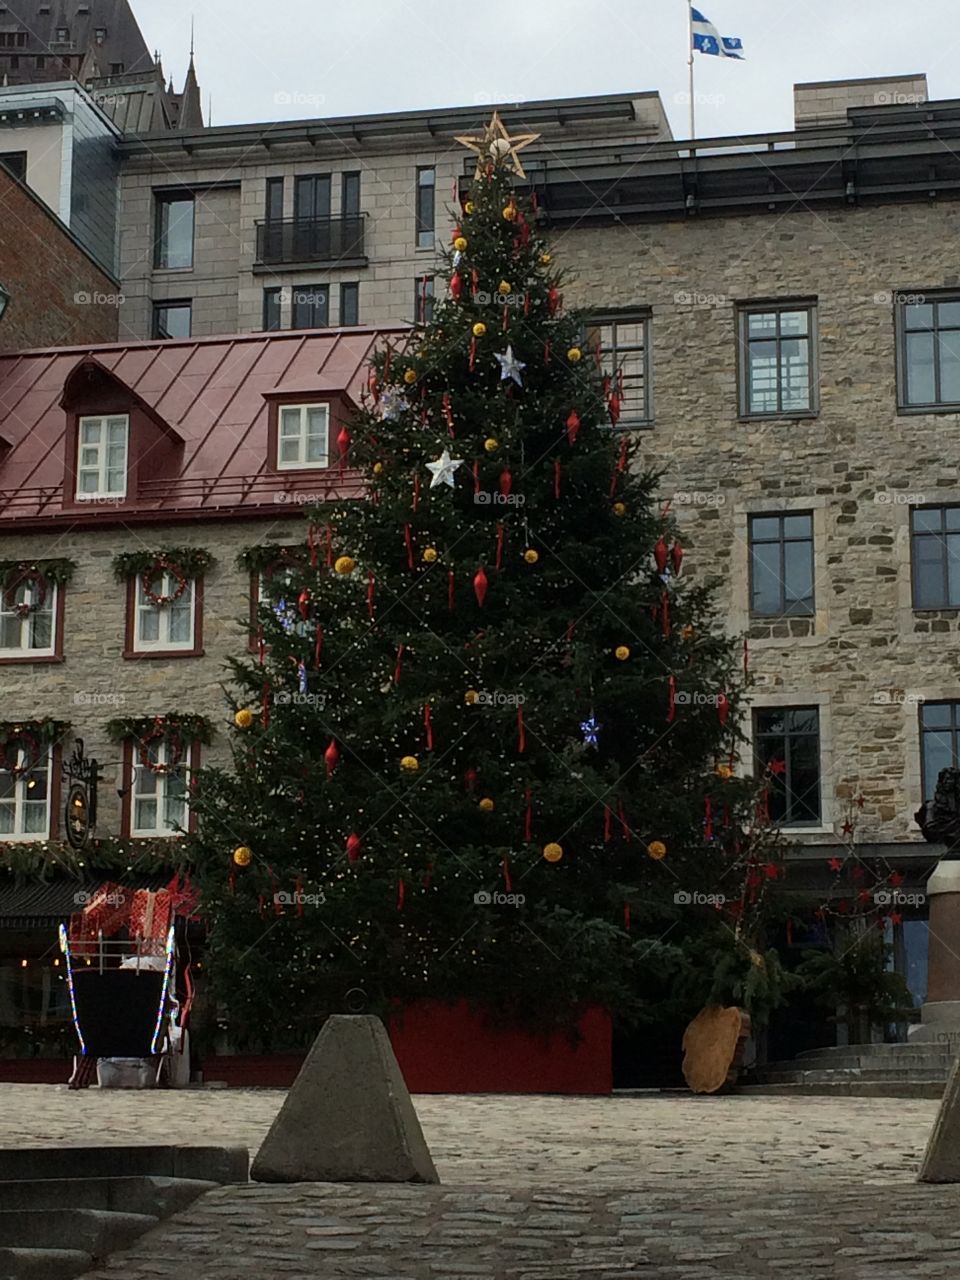 Town square Christmas tree in Old Town Quebec 